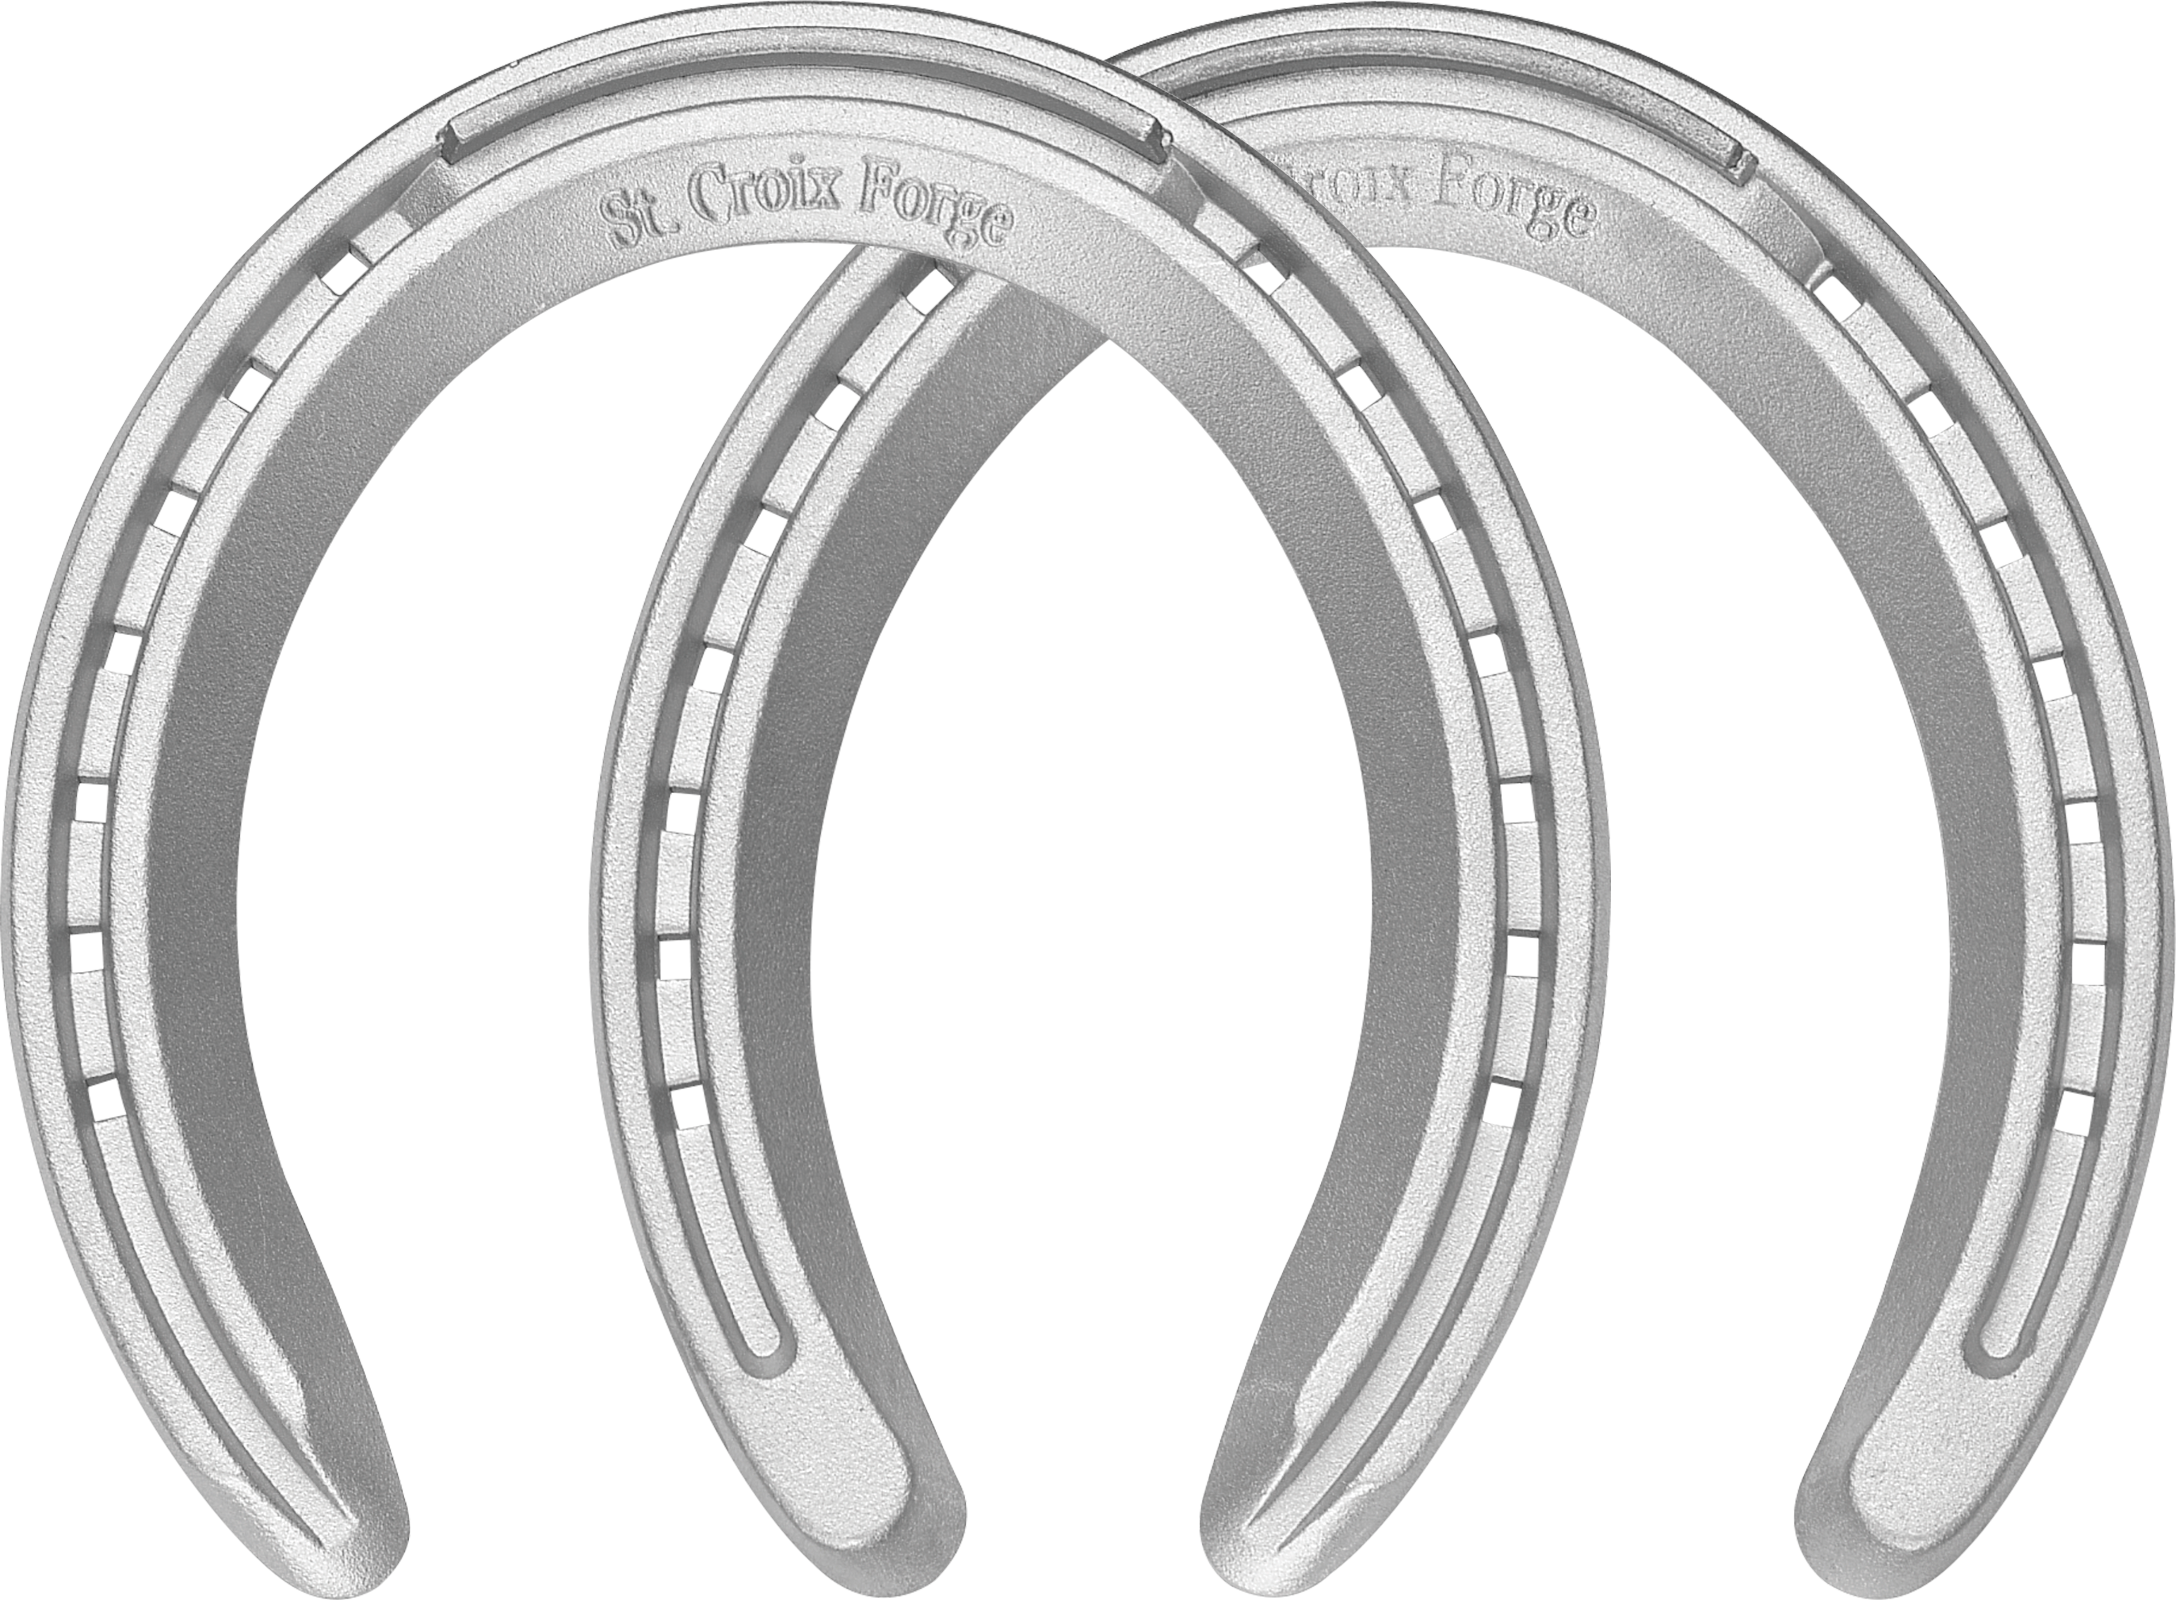 St. Croix QuarterHorse horseshoes, front and hind, bottom view